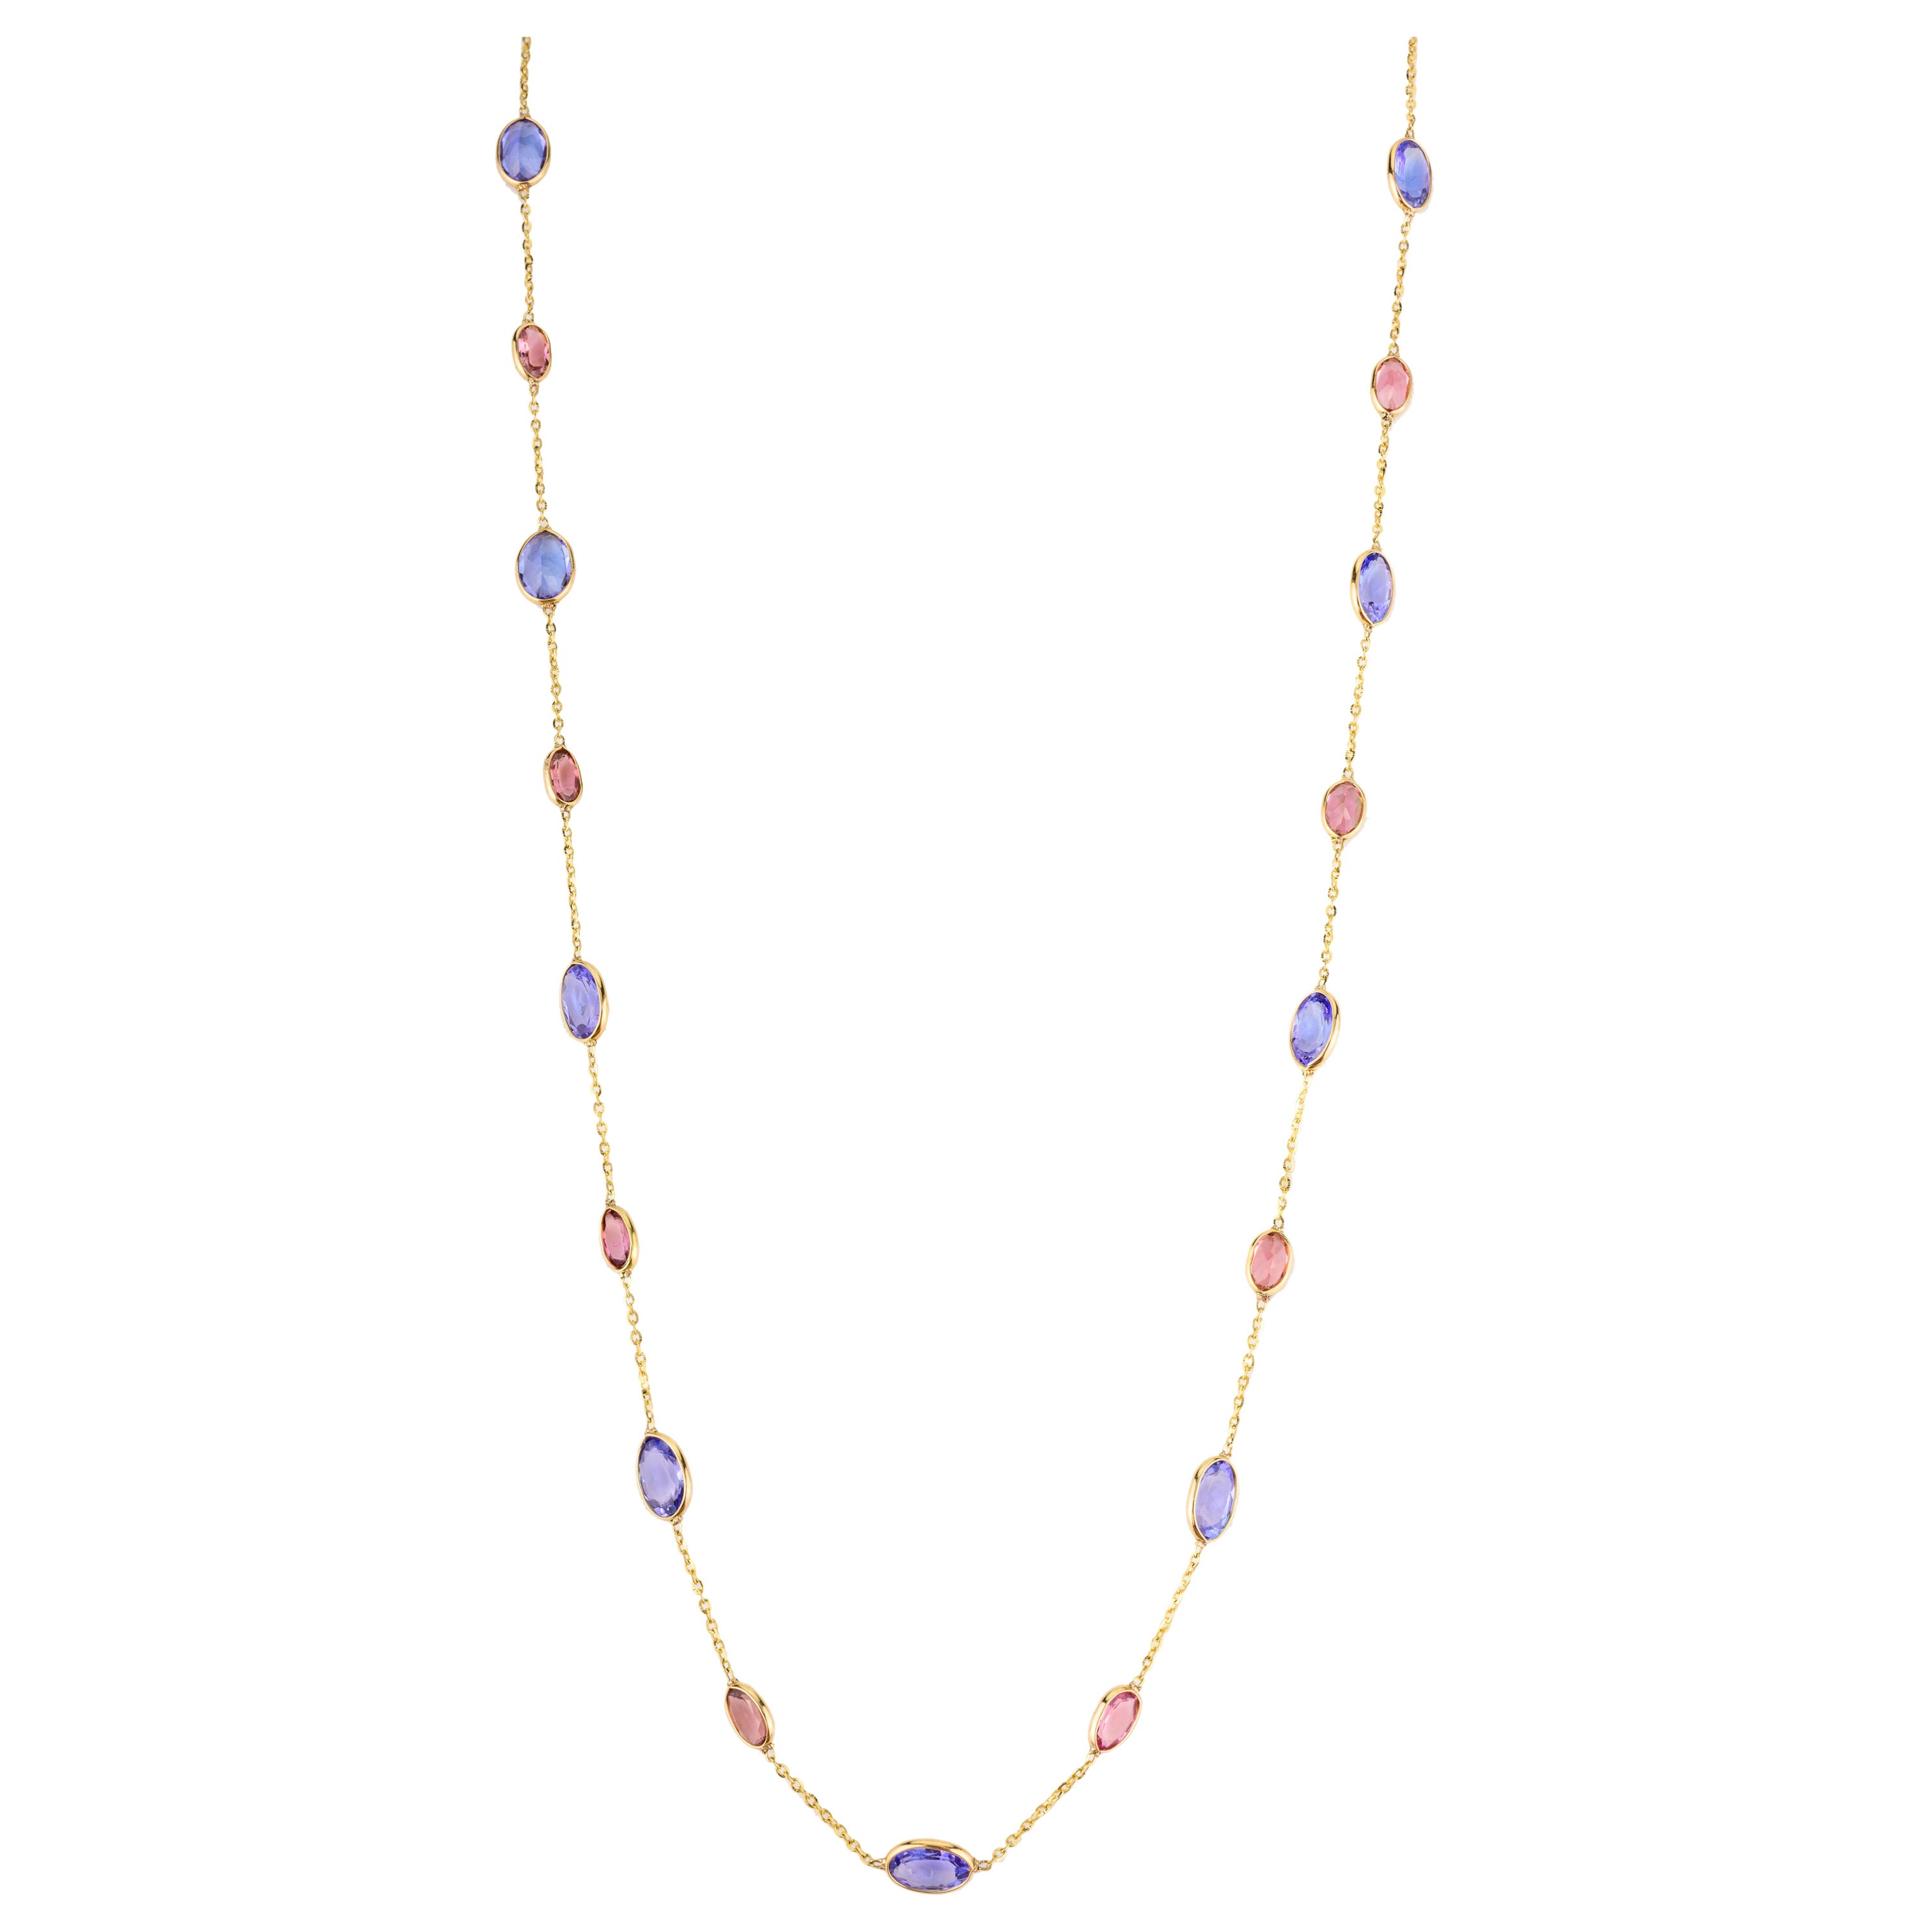 Unique Tanzanite and Tourmaline Station Necklace Crafted in 18k Yellow Gold